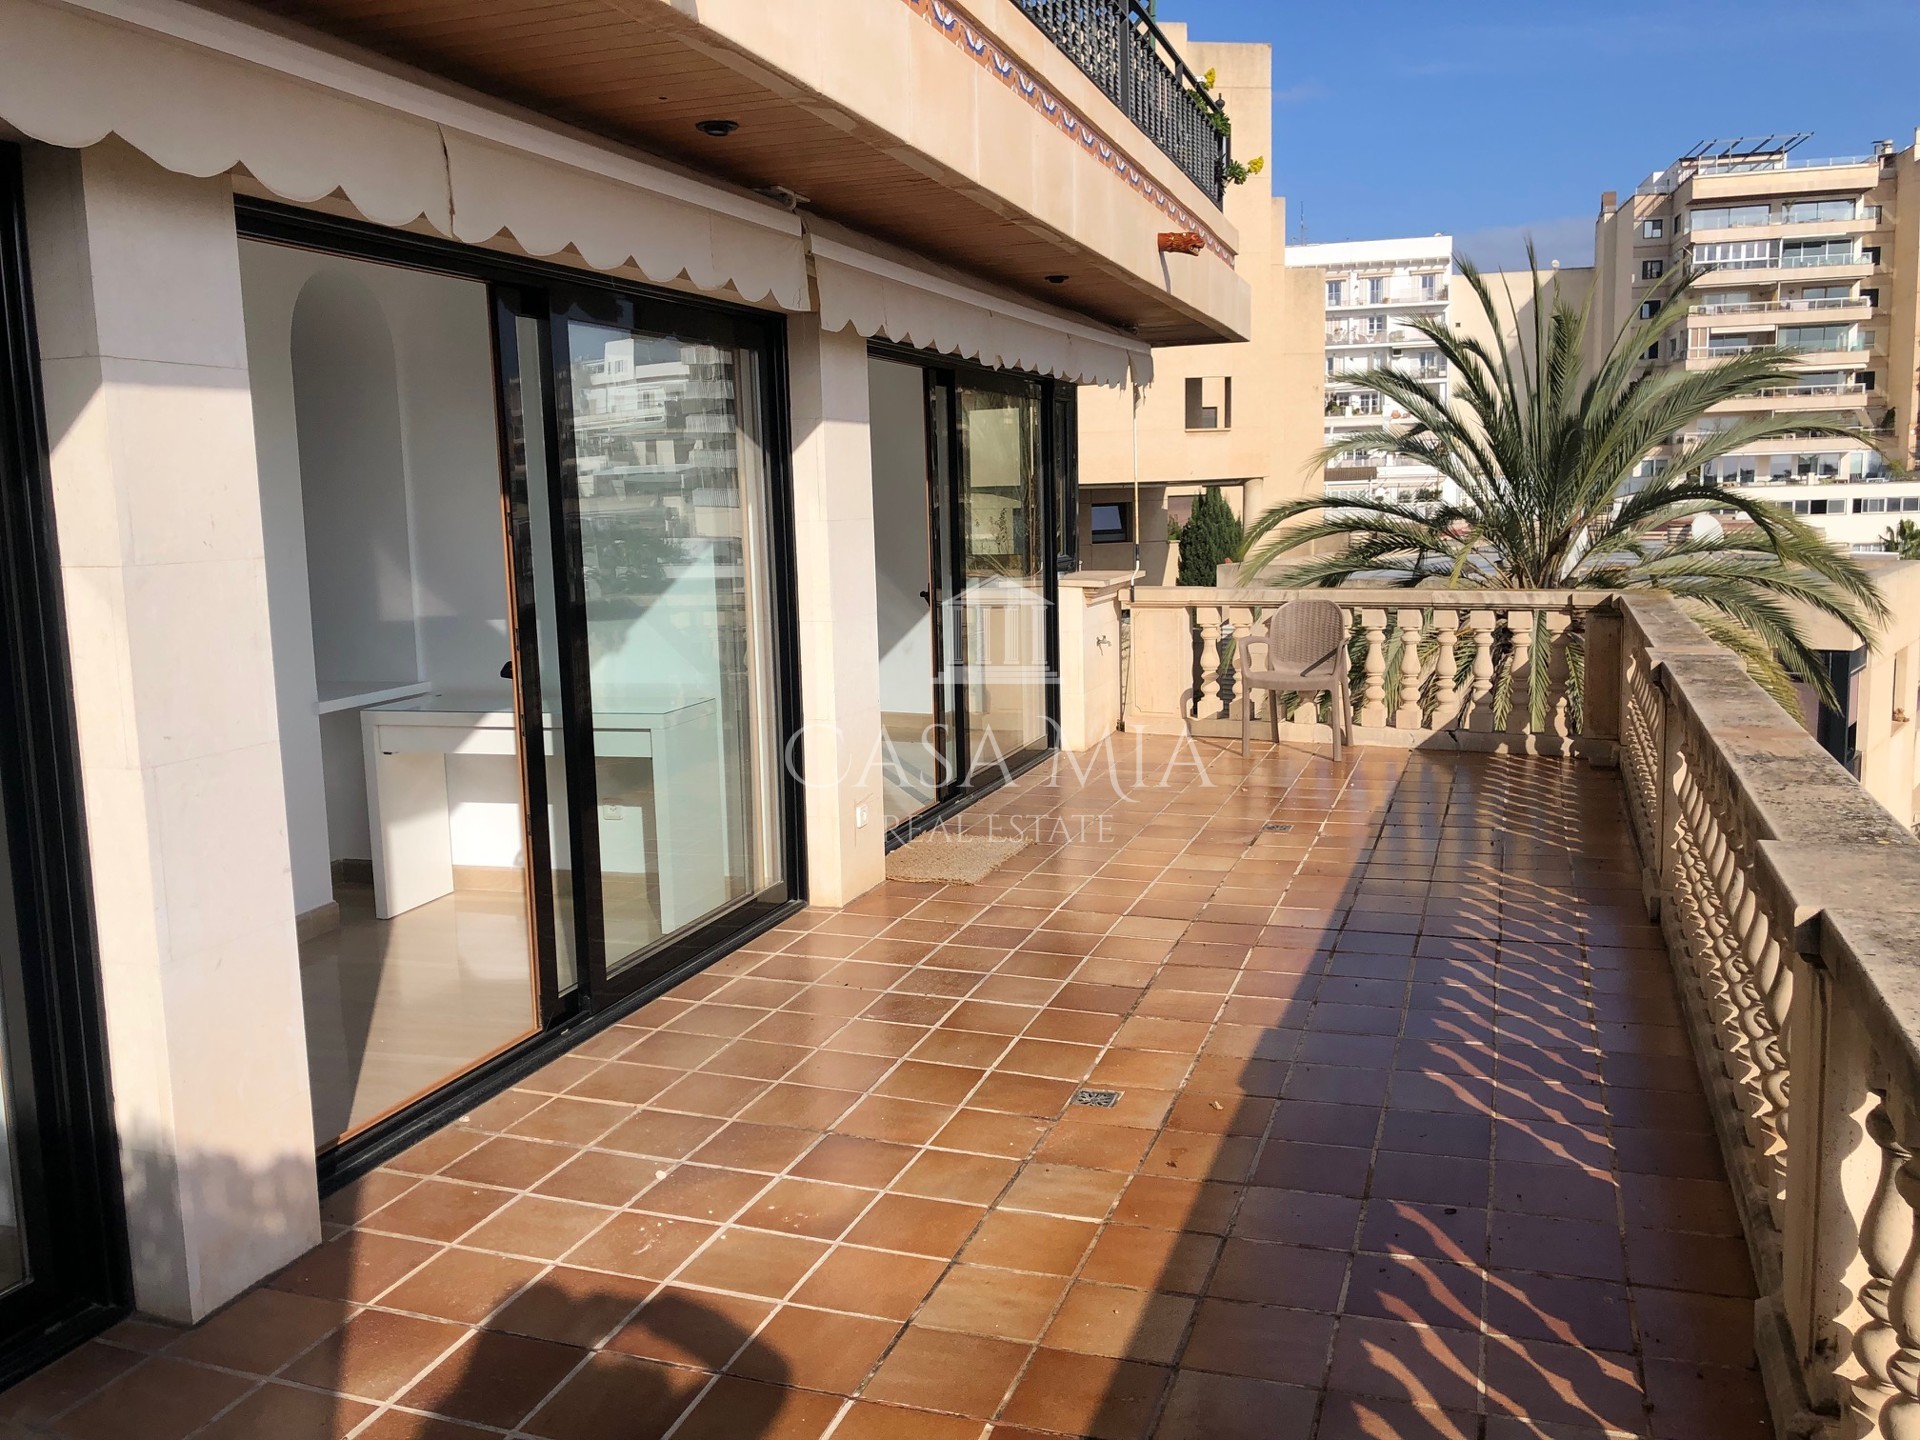 Beautiful apartment with sea view in the port of Can Barbara, Palma